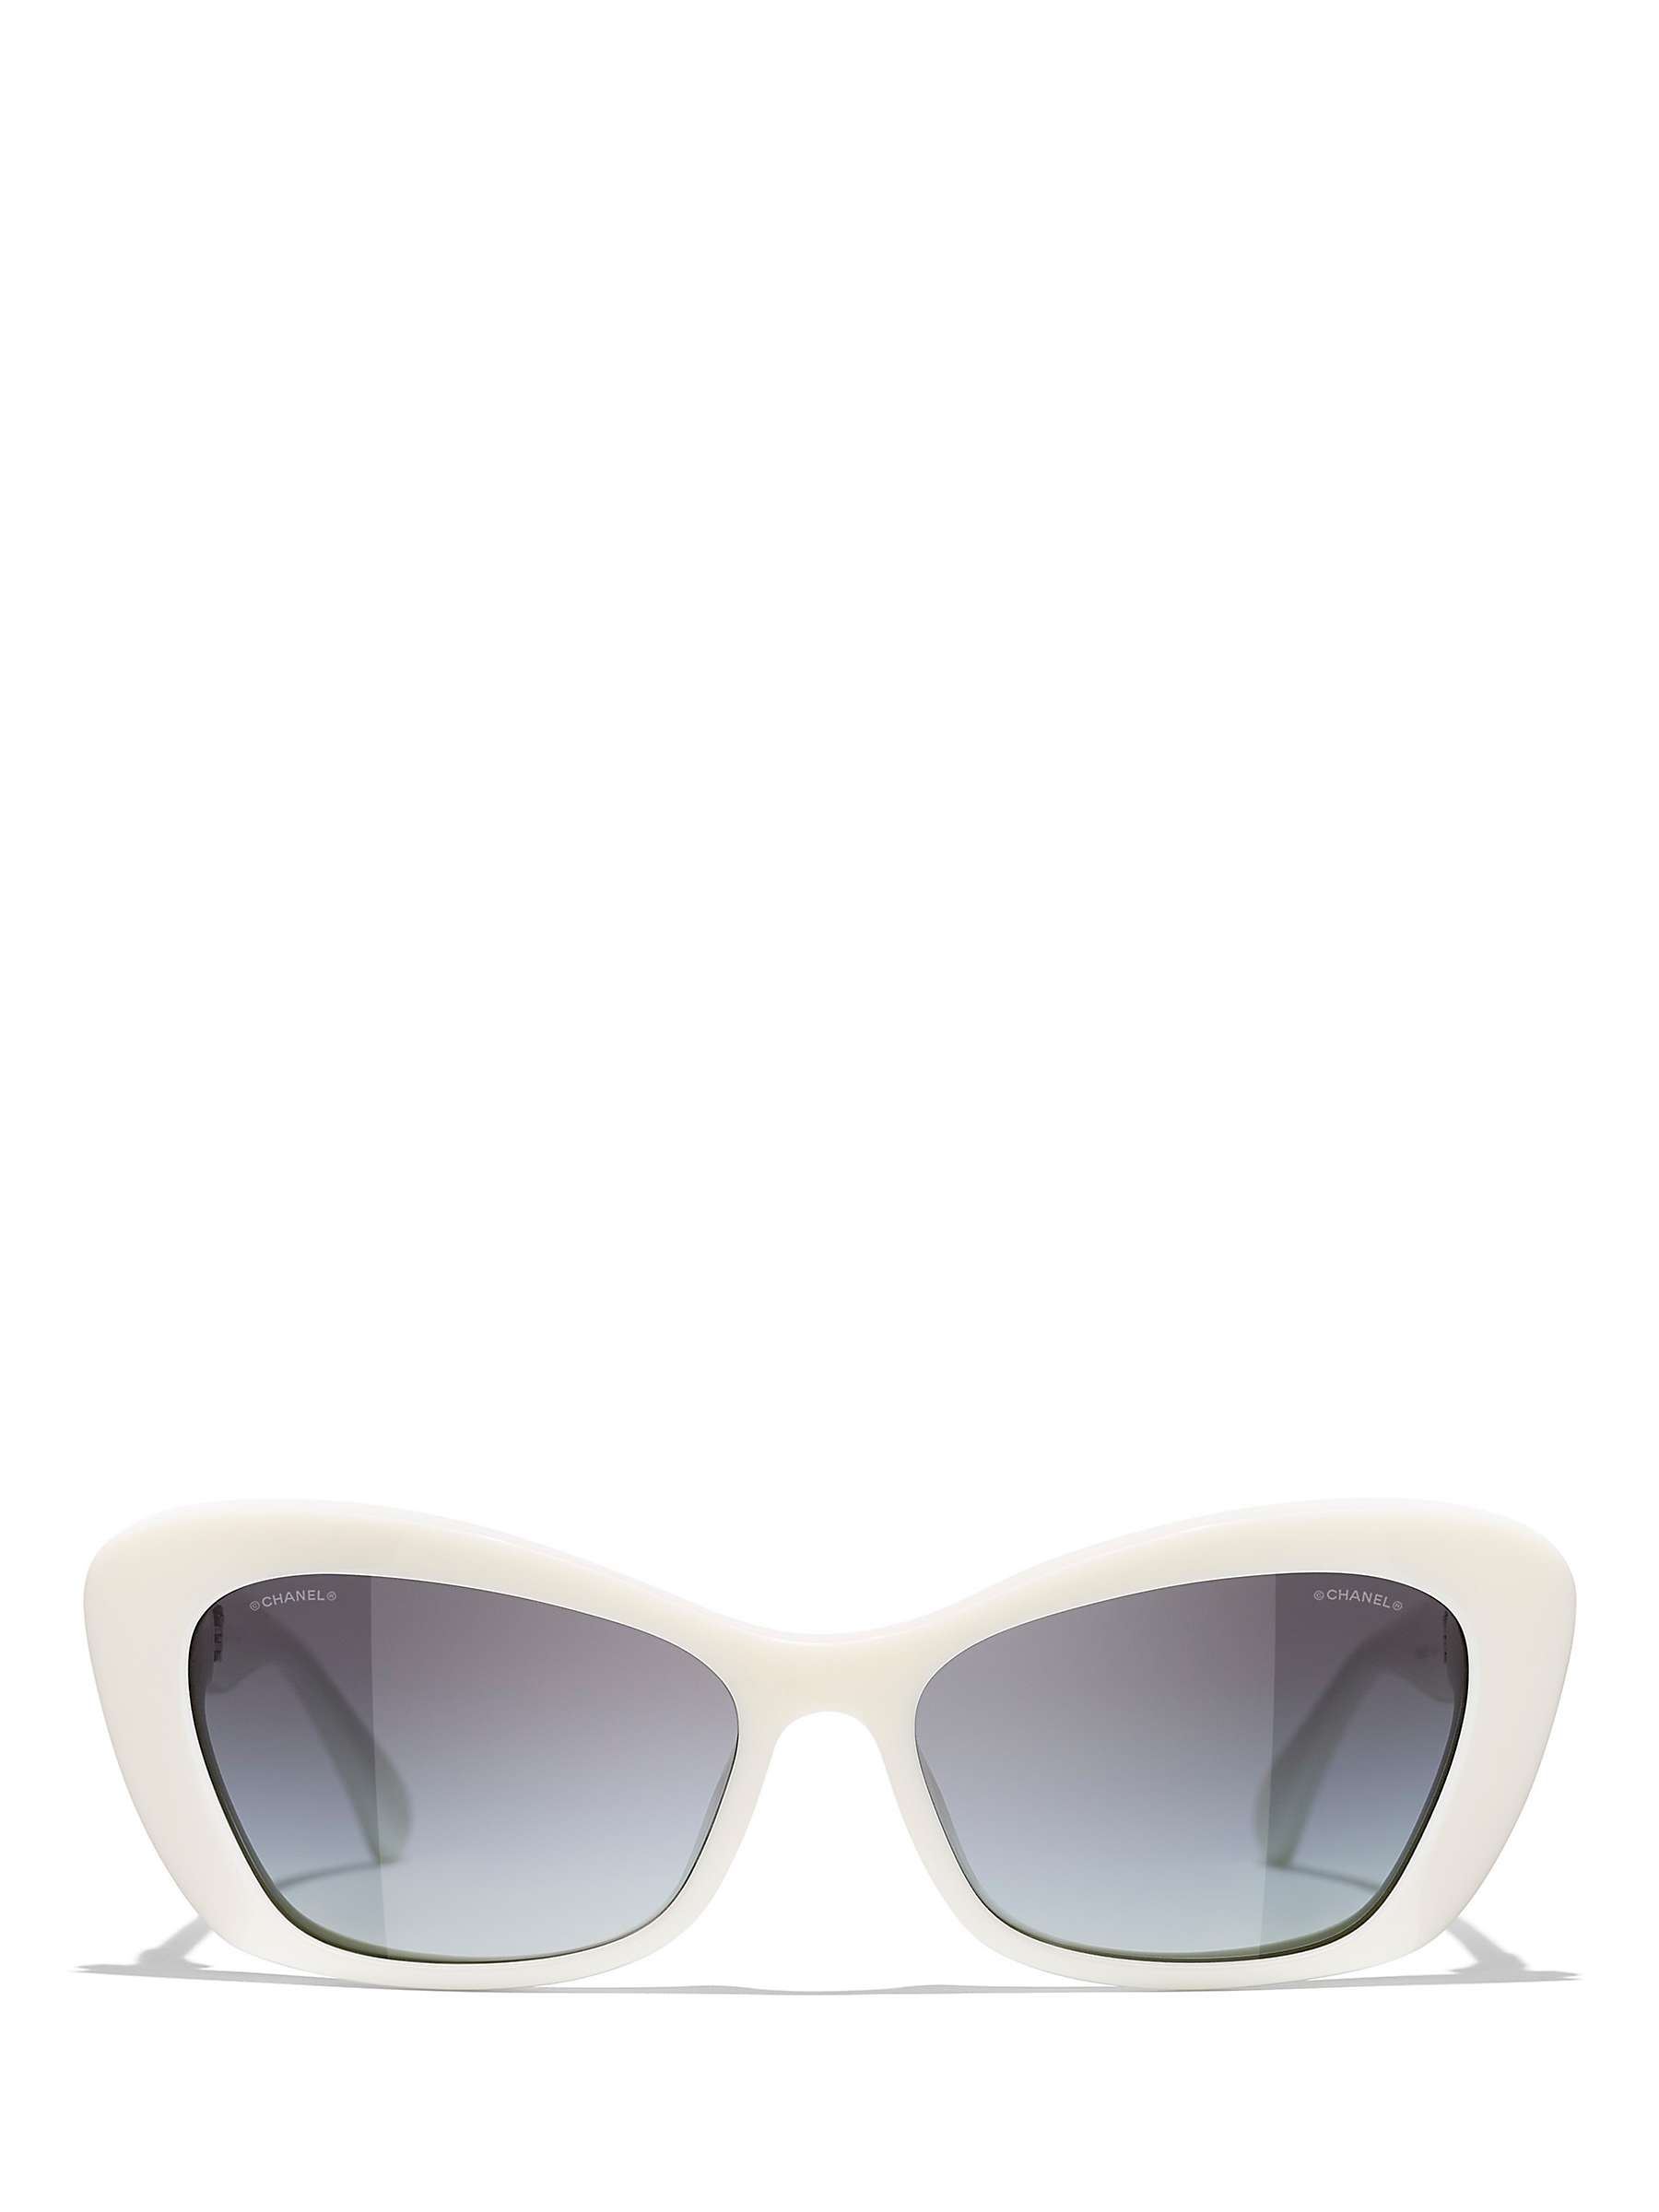 Buy CHANEL Butterfly Sunglasses CH5481H Opal White/Blue Gradient Online at johnlewis.com